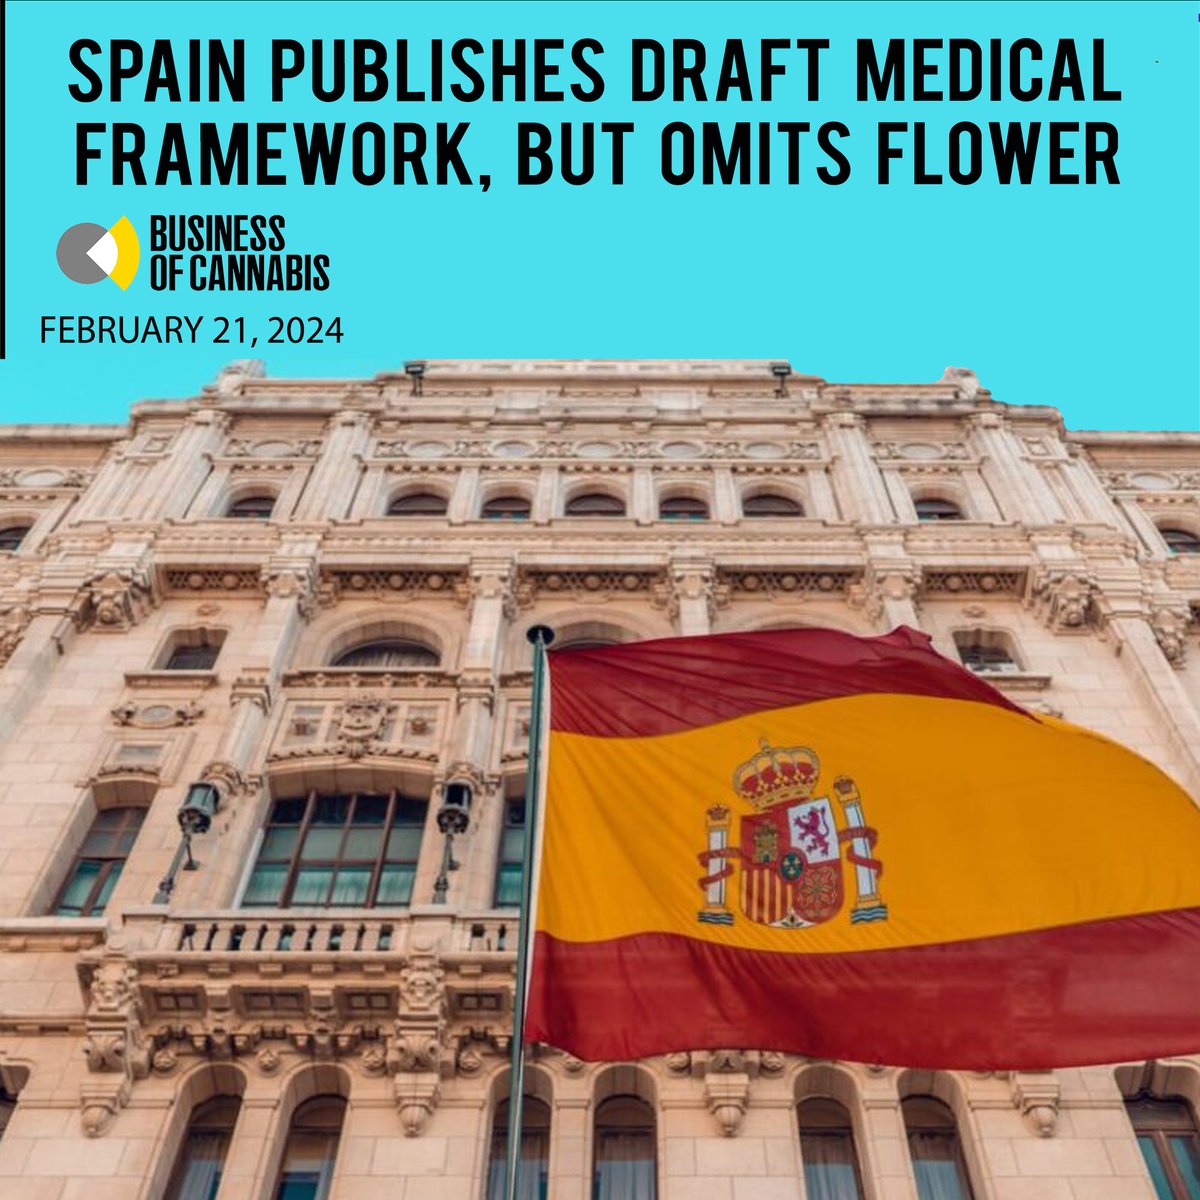 NEWS You Might Have Missed
@spain_cannabis 
@pirate_spainweed 
@canna.spain 
@cannakings 
#spain #spain🇪🇸 #spainlife #mmj #mmjcommunity #education #spain❤️ #change #GlobalCommunity